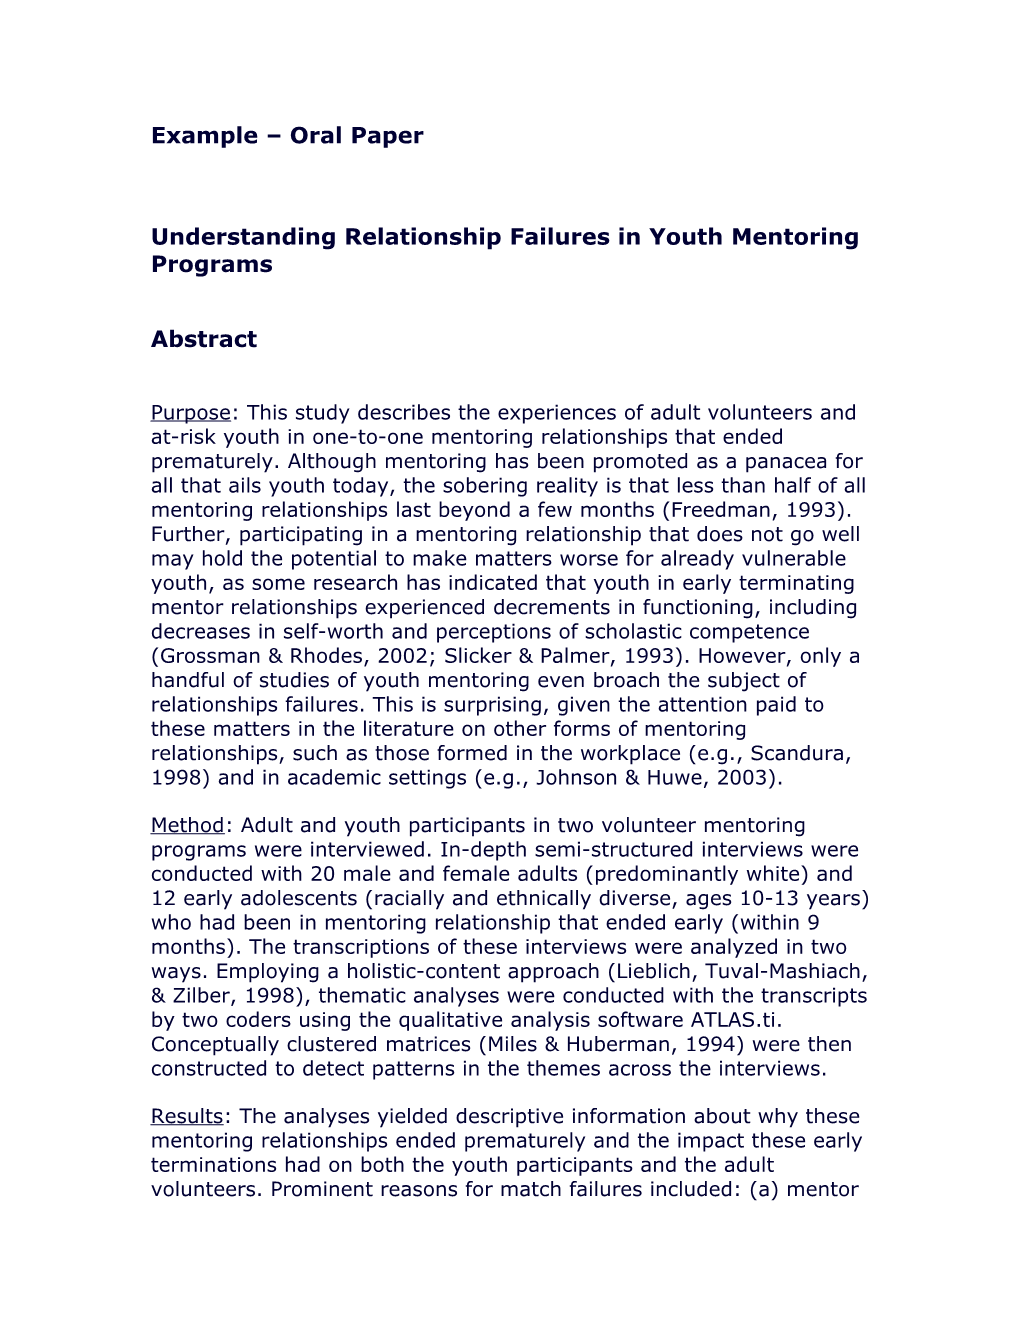 Understanding Relationship Failures in Youth Mentoring Programs